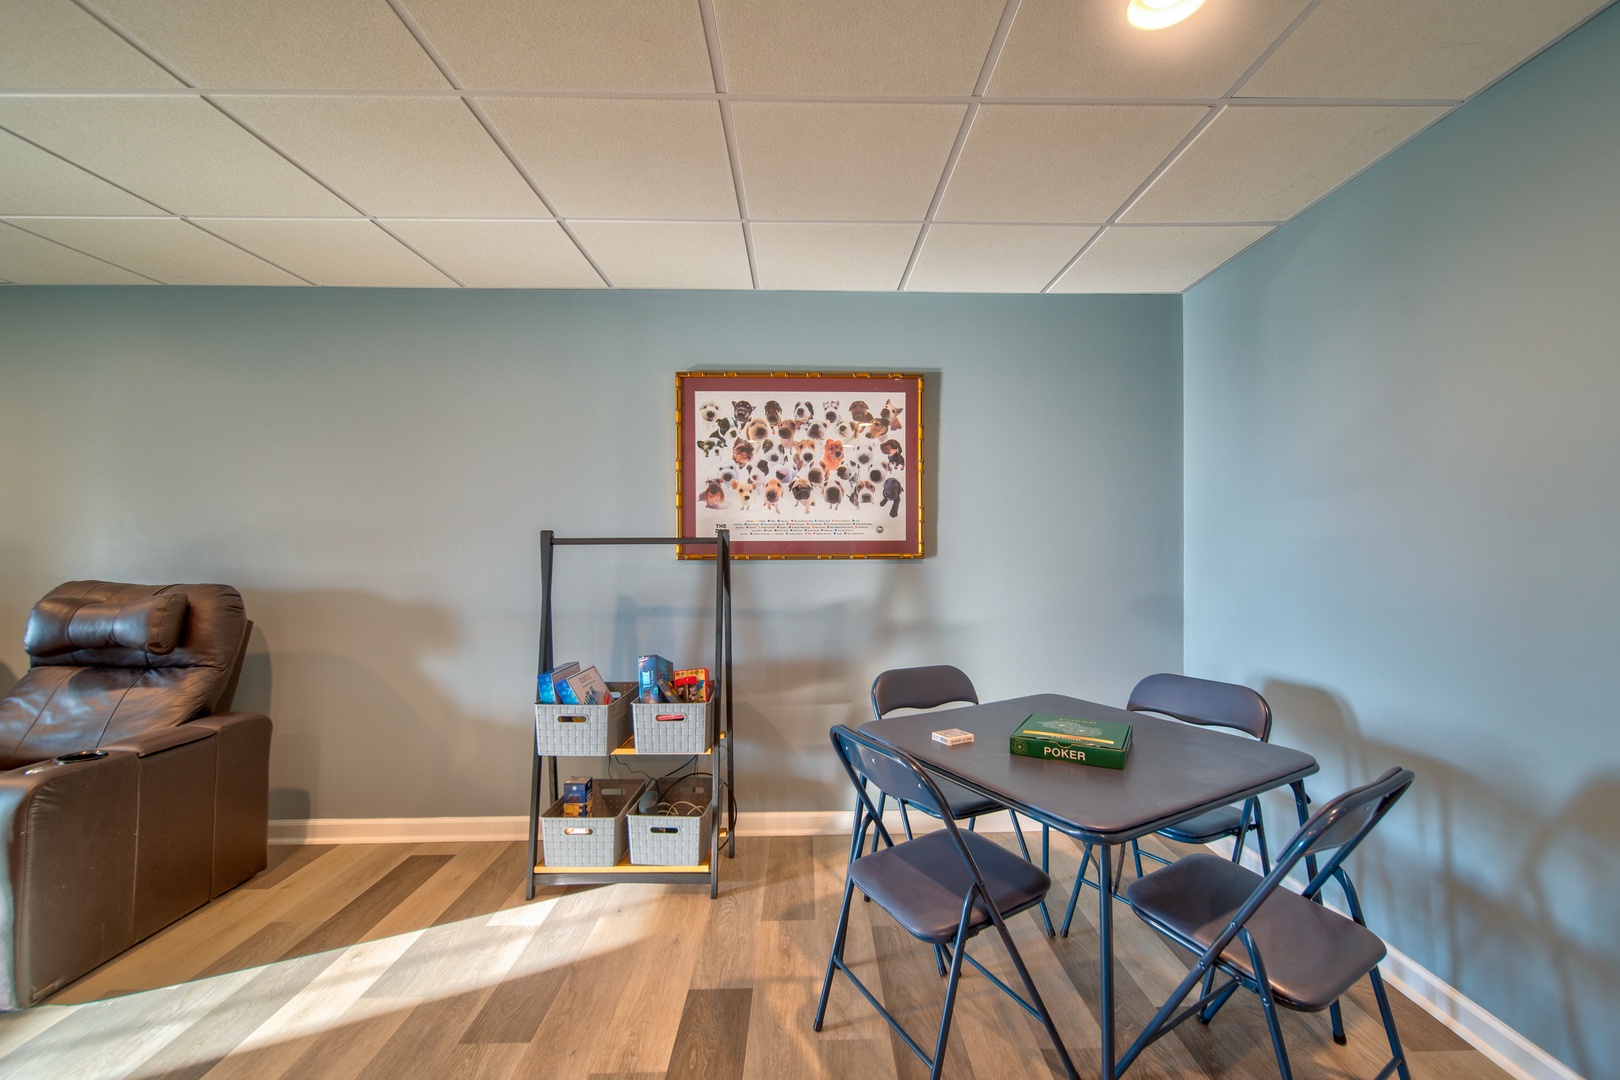 Enjoy a round of cards or play a board game at the lower-level game table